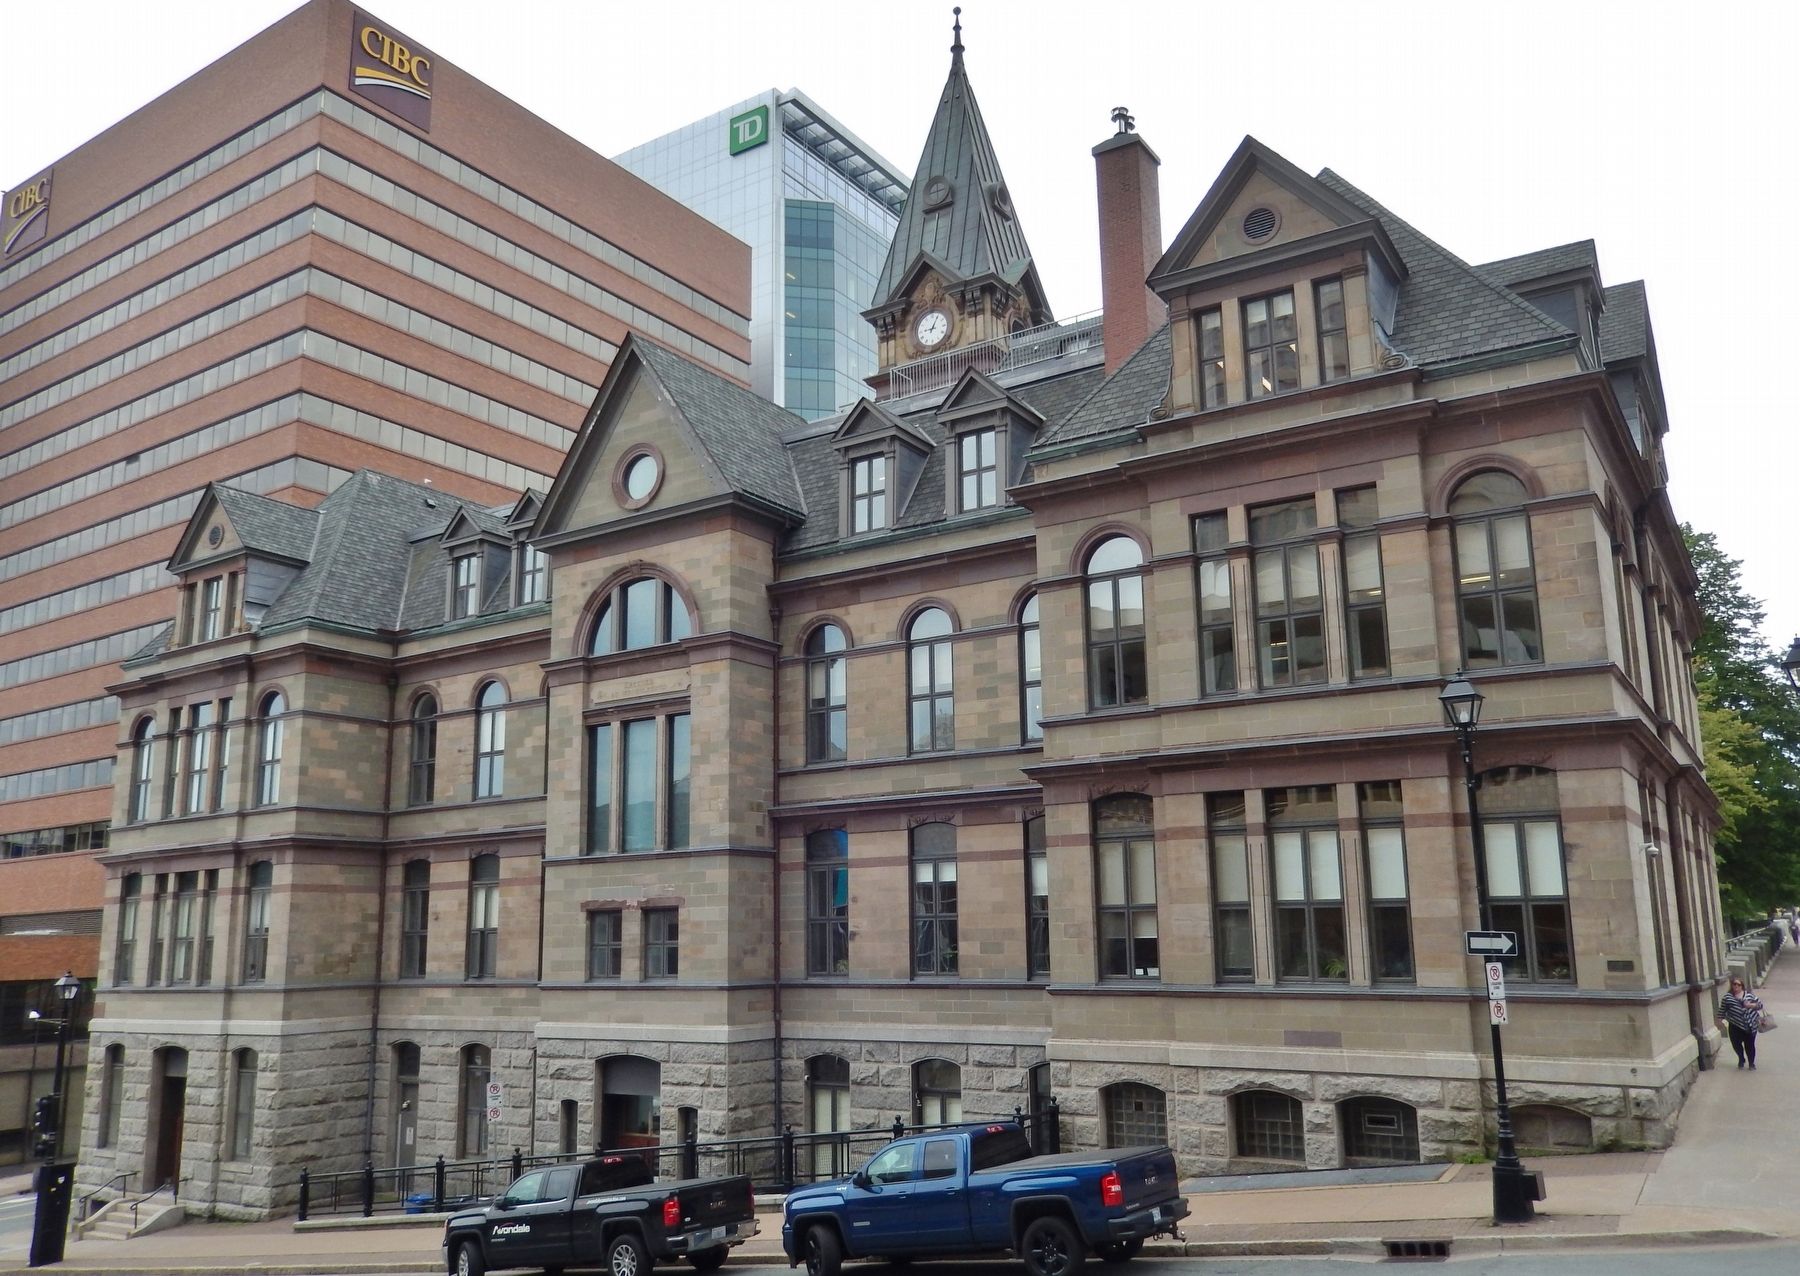 Halifax City Hall (<i>north side  view from near marker</i>) image. Click for full size.